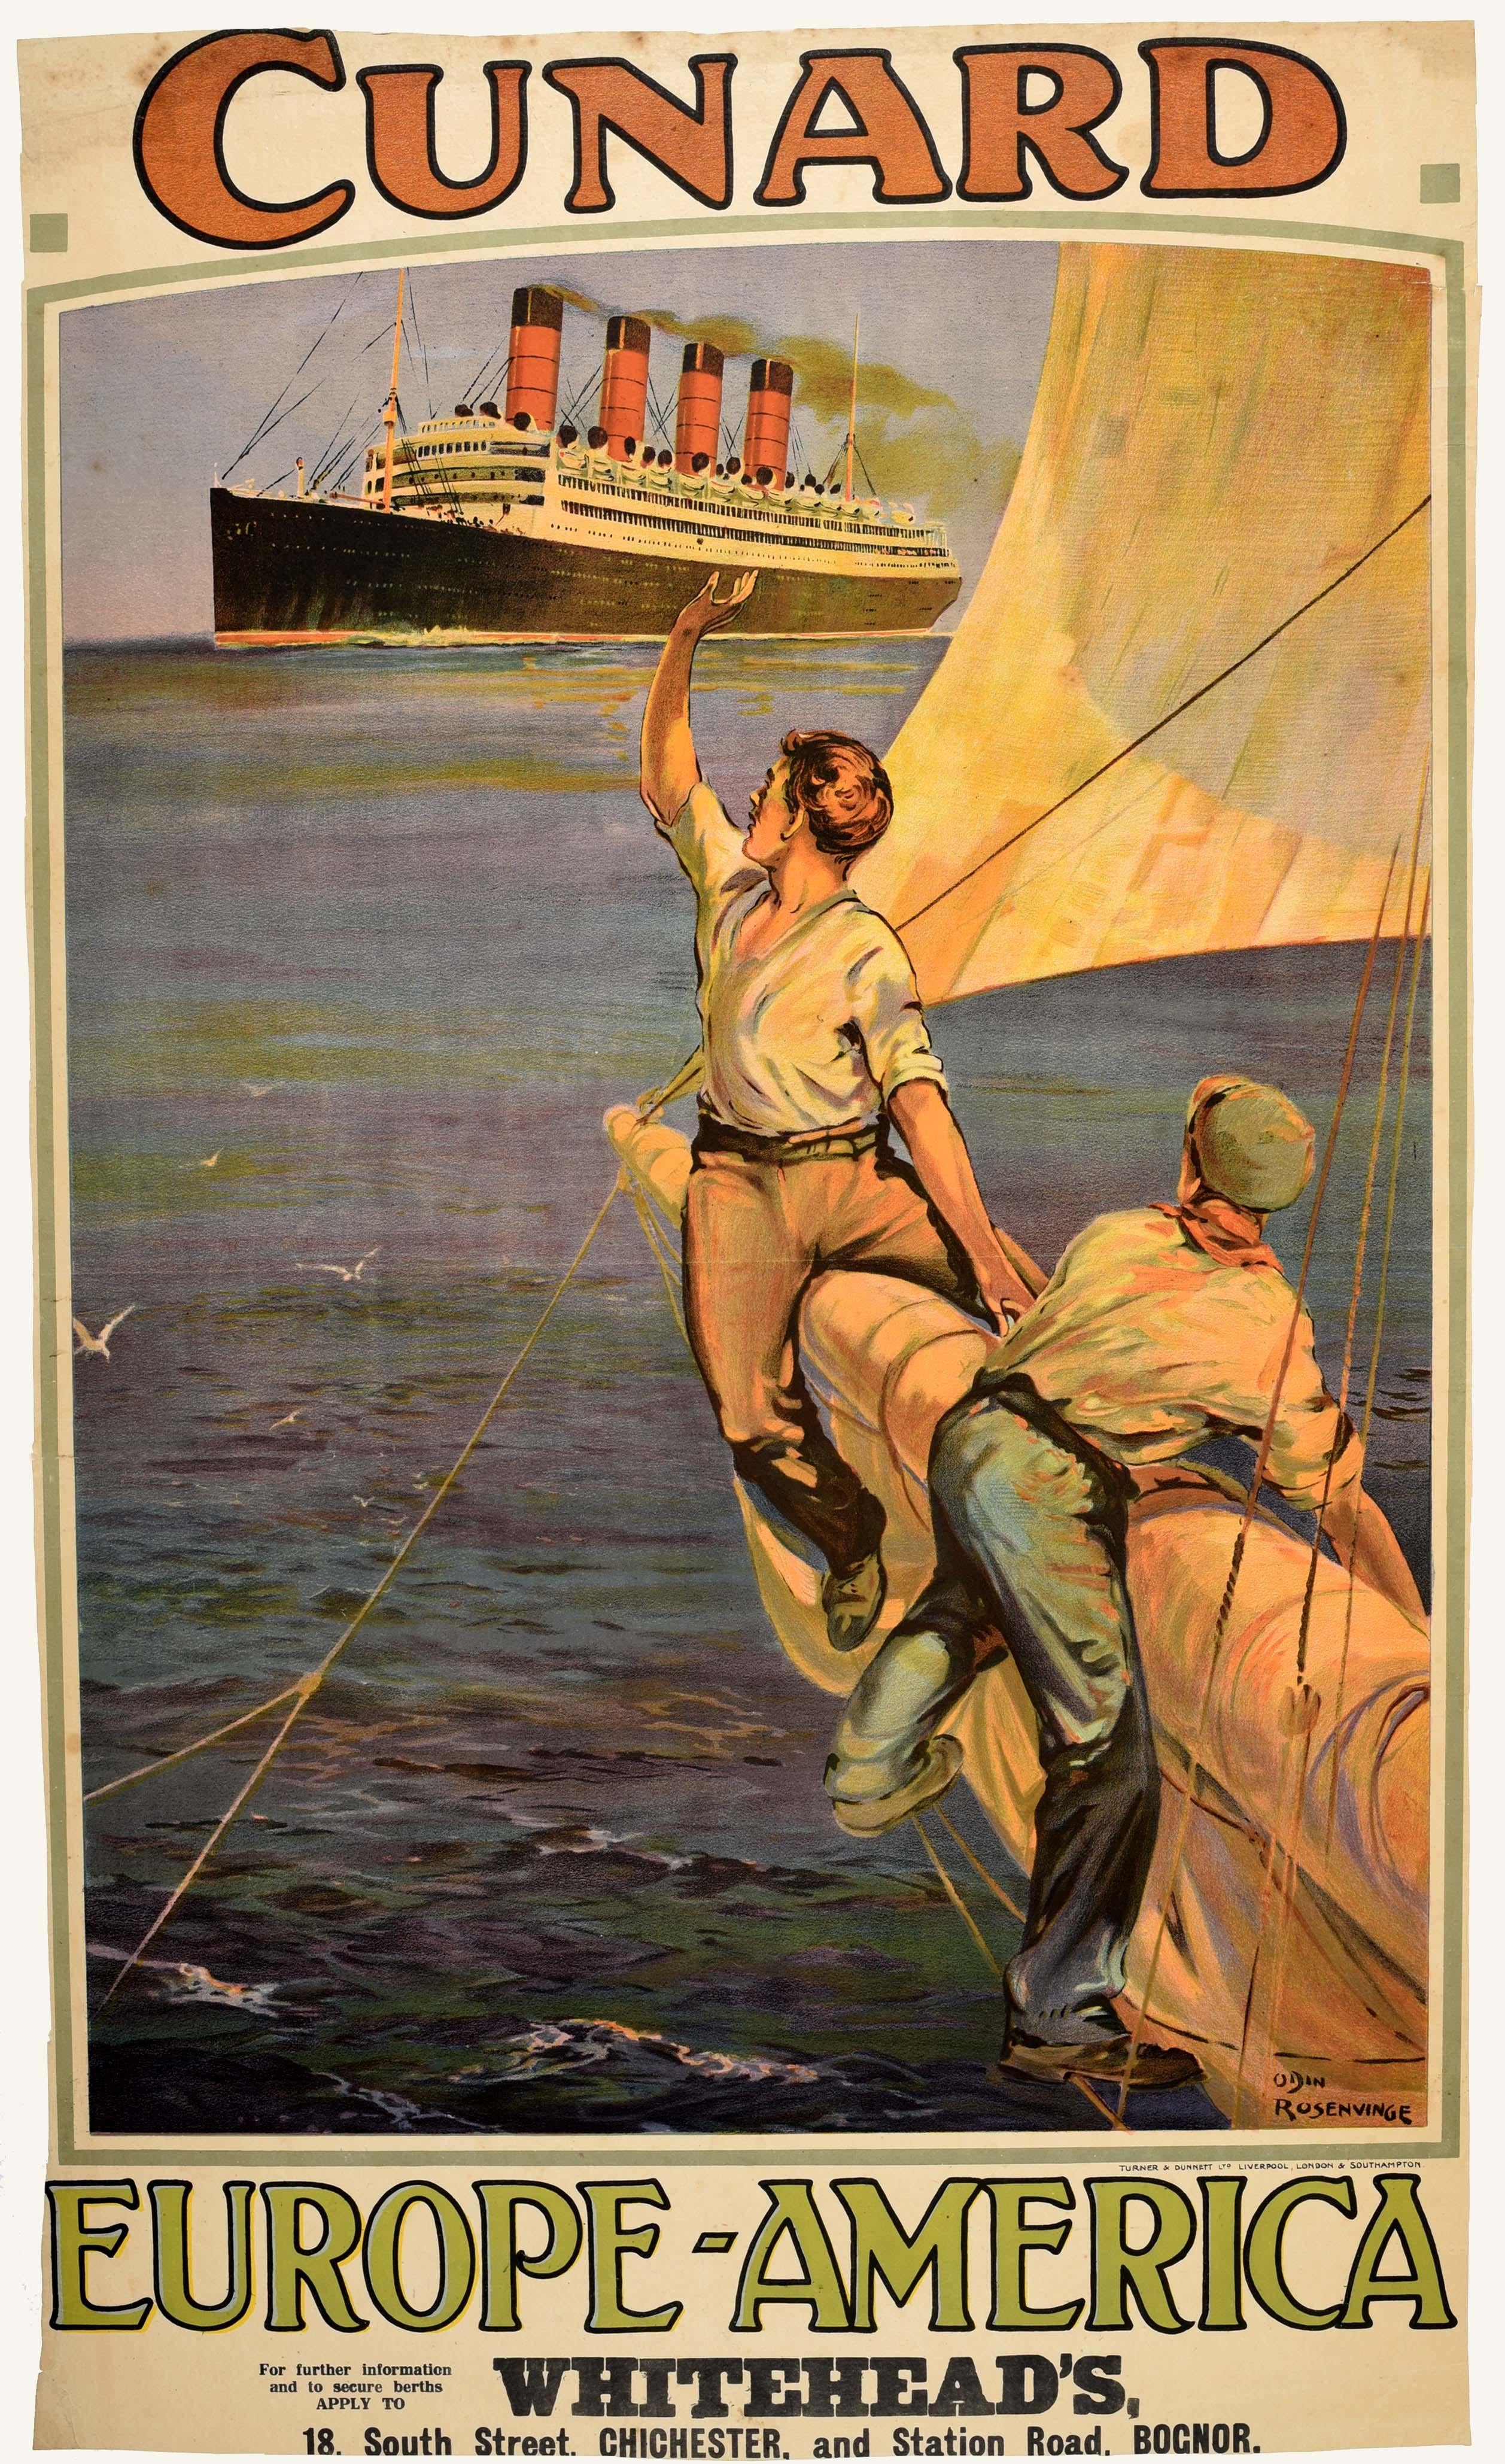 Original antique cruise travel advertising poster for Cunard Line Europe-America featuring a stunning illustration by Odin Rosenvinge (1880-1957) of a four funnel Aquitania Cunard ocean liner sailing at sea with two men watching and waving from the